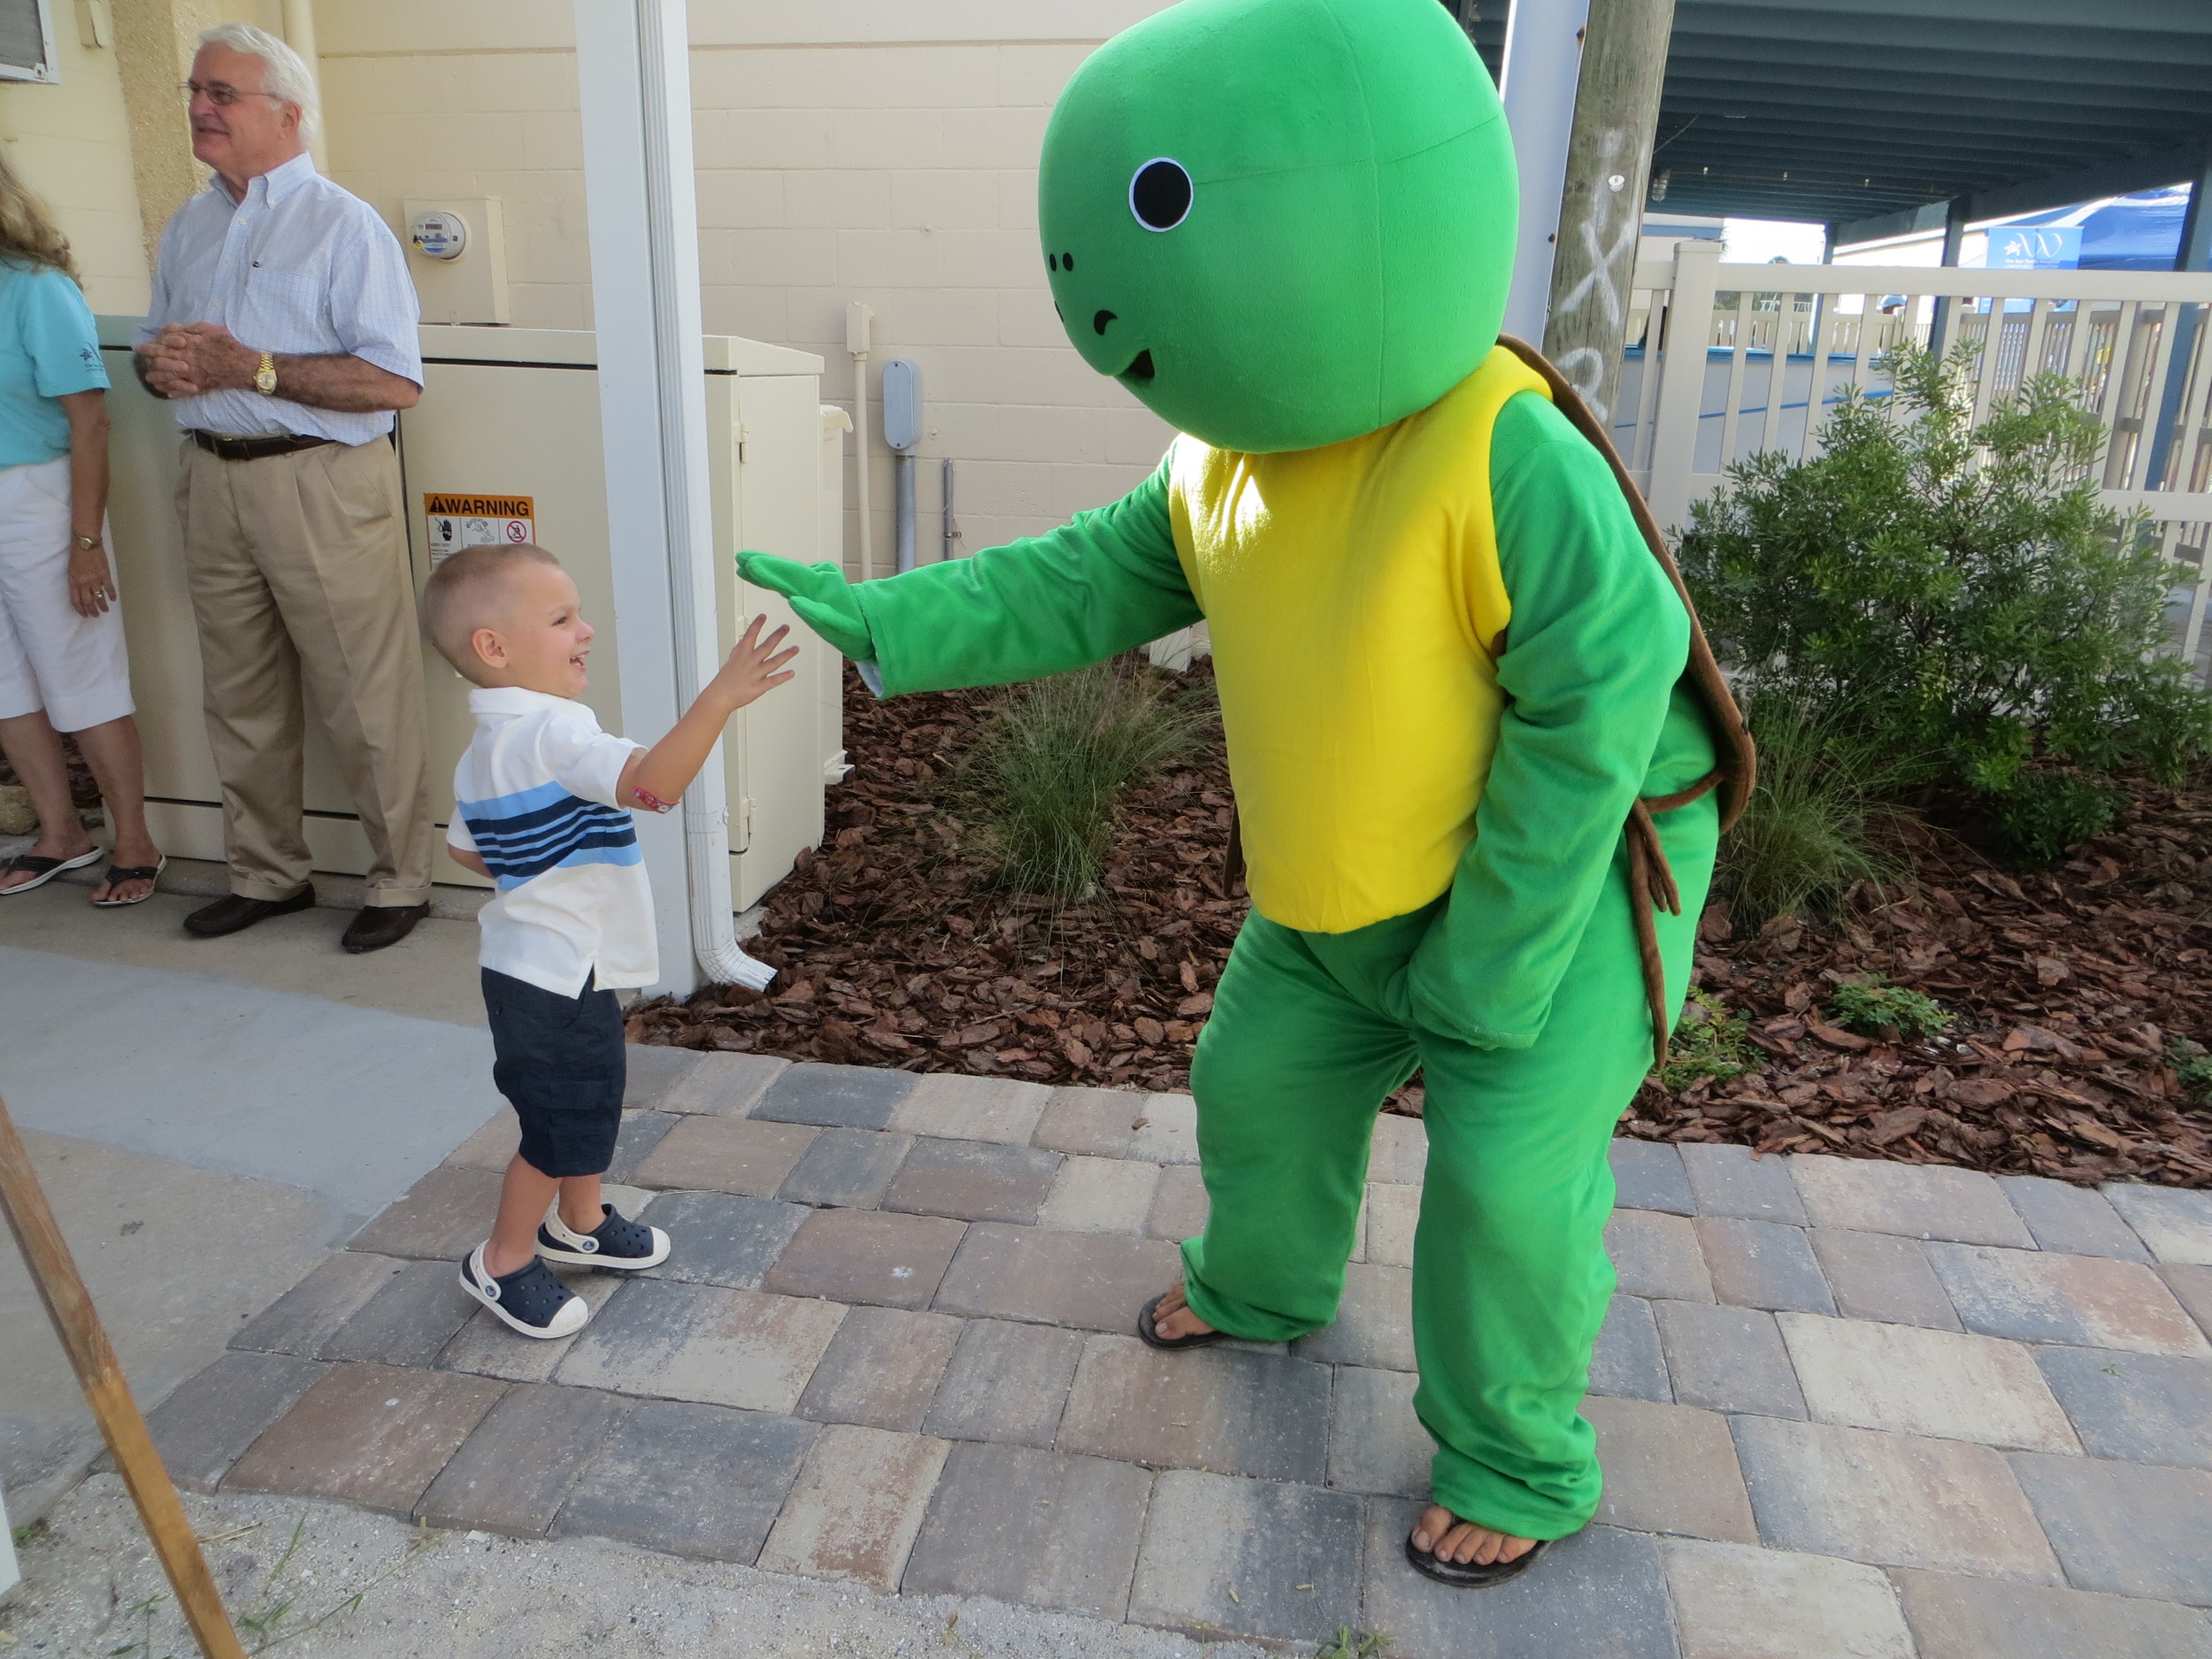 Luke Gregoire, 3, from St. Augustine gives a high-five to “Barry” the sea turtle mascot